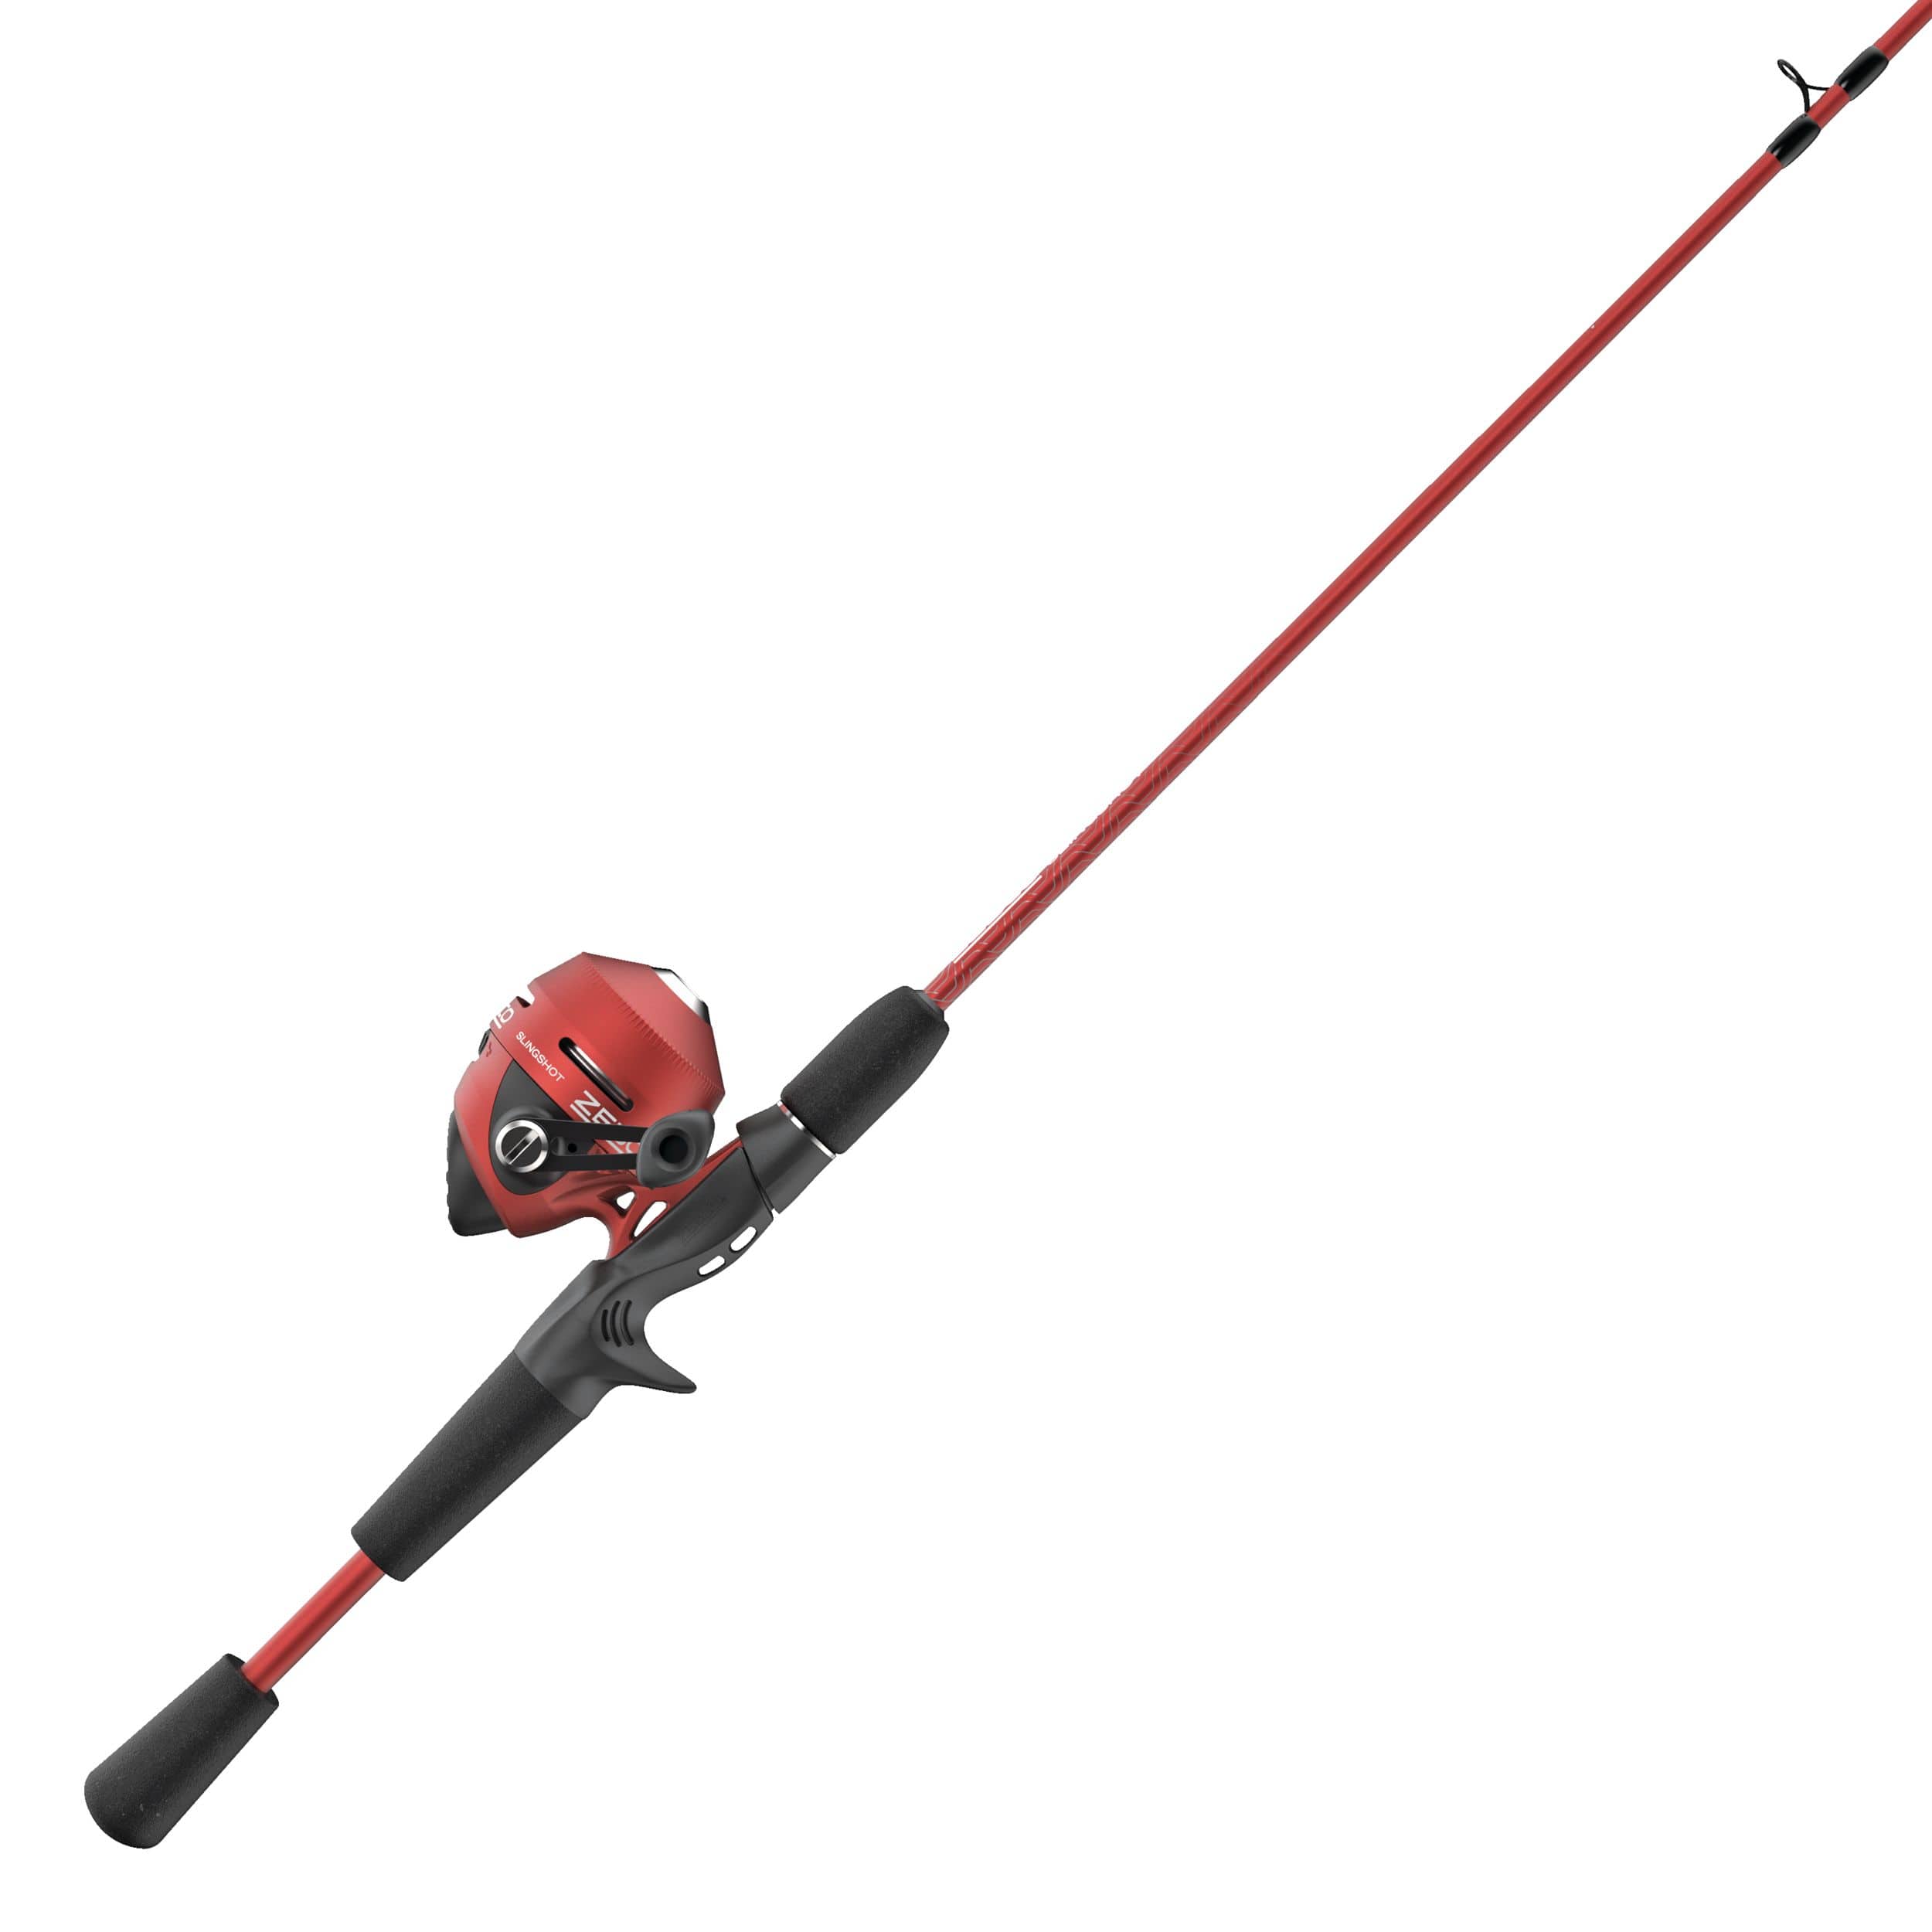 Zebco Big Cat Spinning Reel and Fishing Rod Combo, 7-Foot 2-Piece